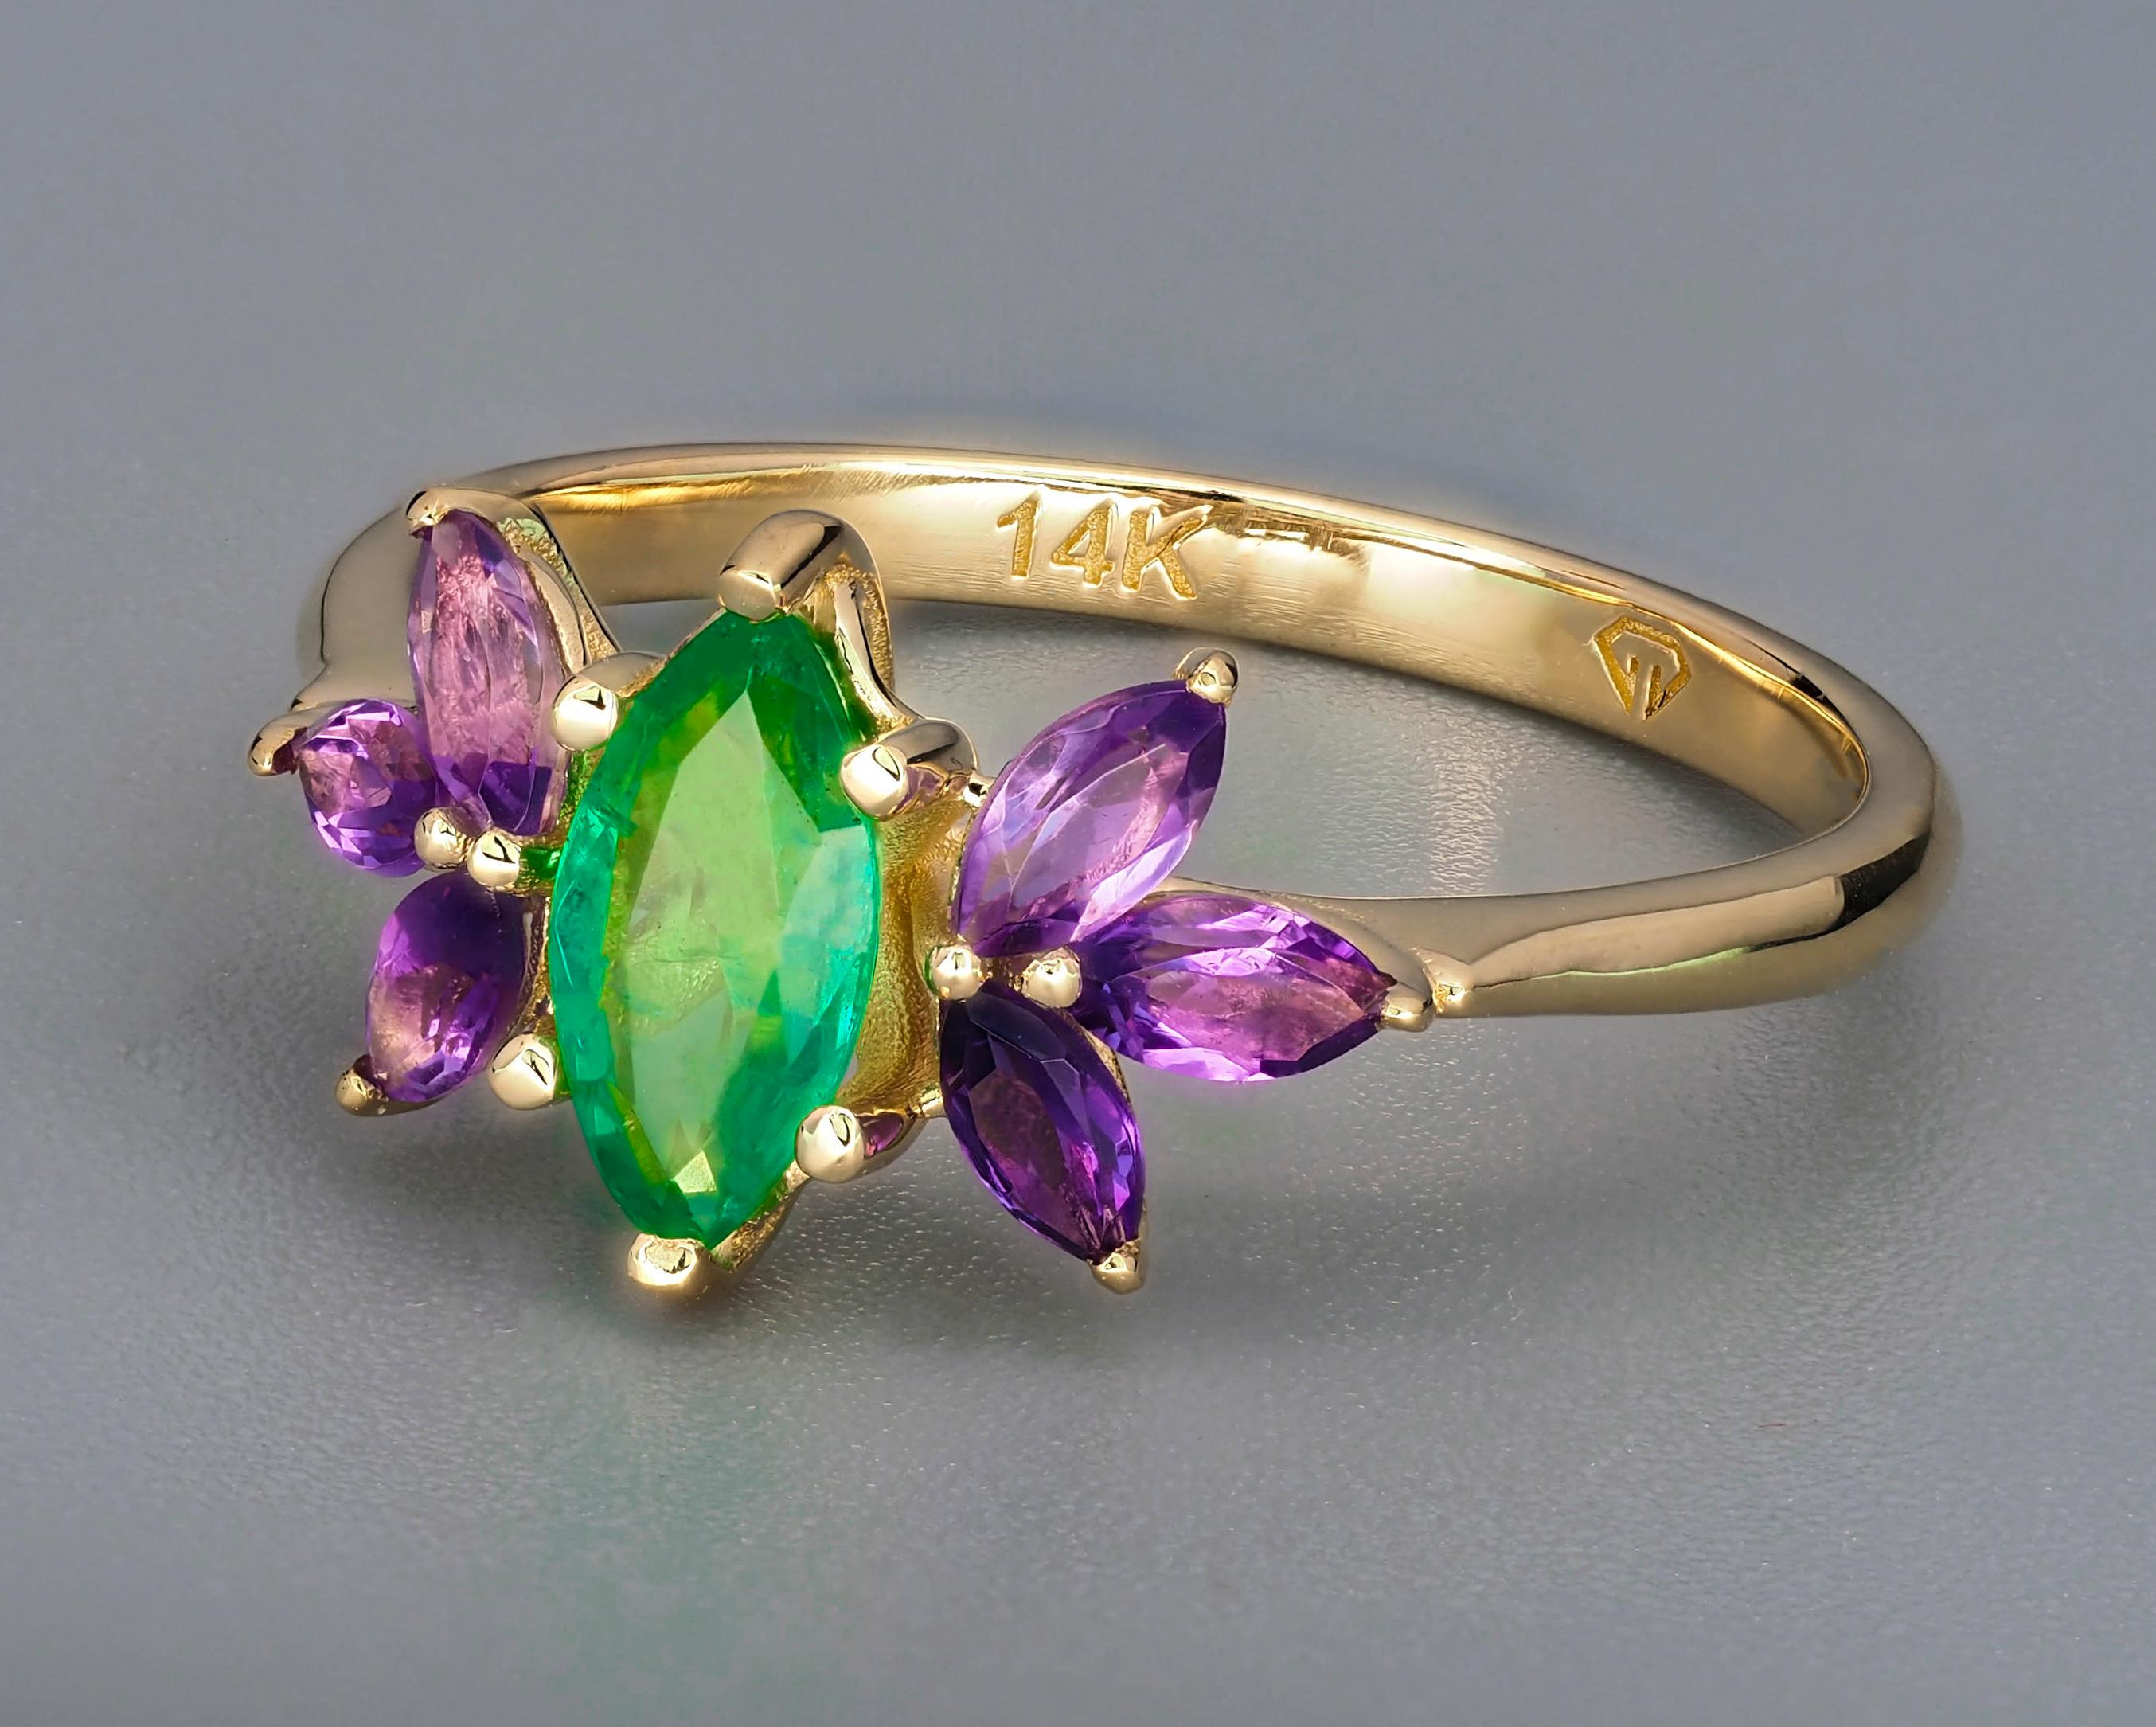 For Sale:  Emerald gold ring. 14k Gold Ring with Marquise Emerald and Amethysts.  5